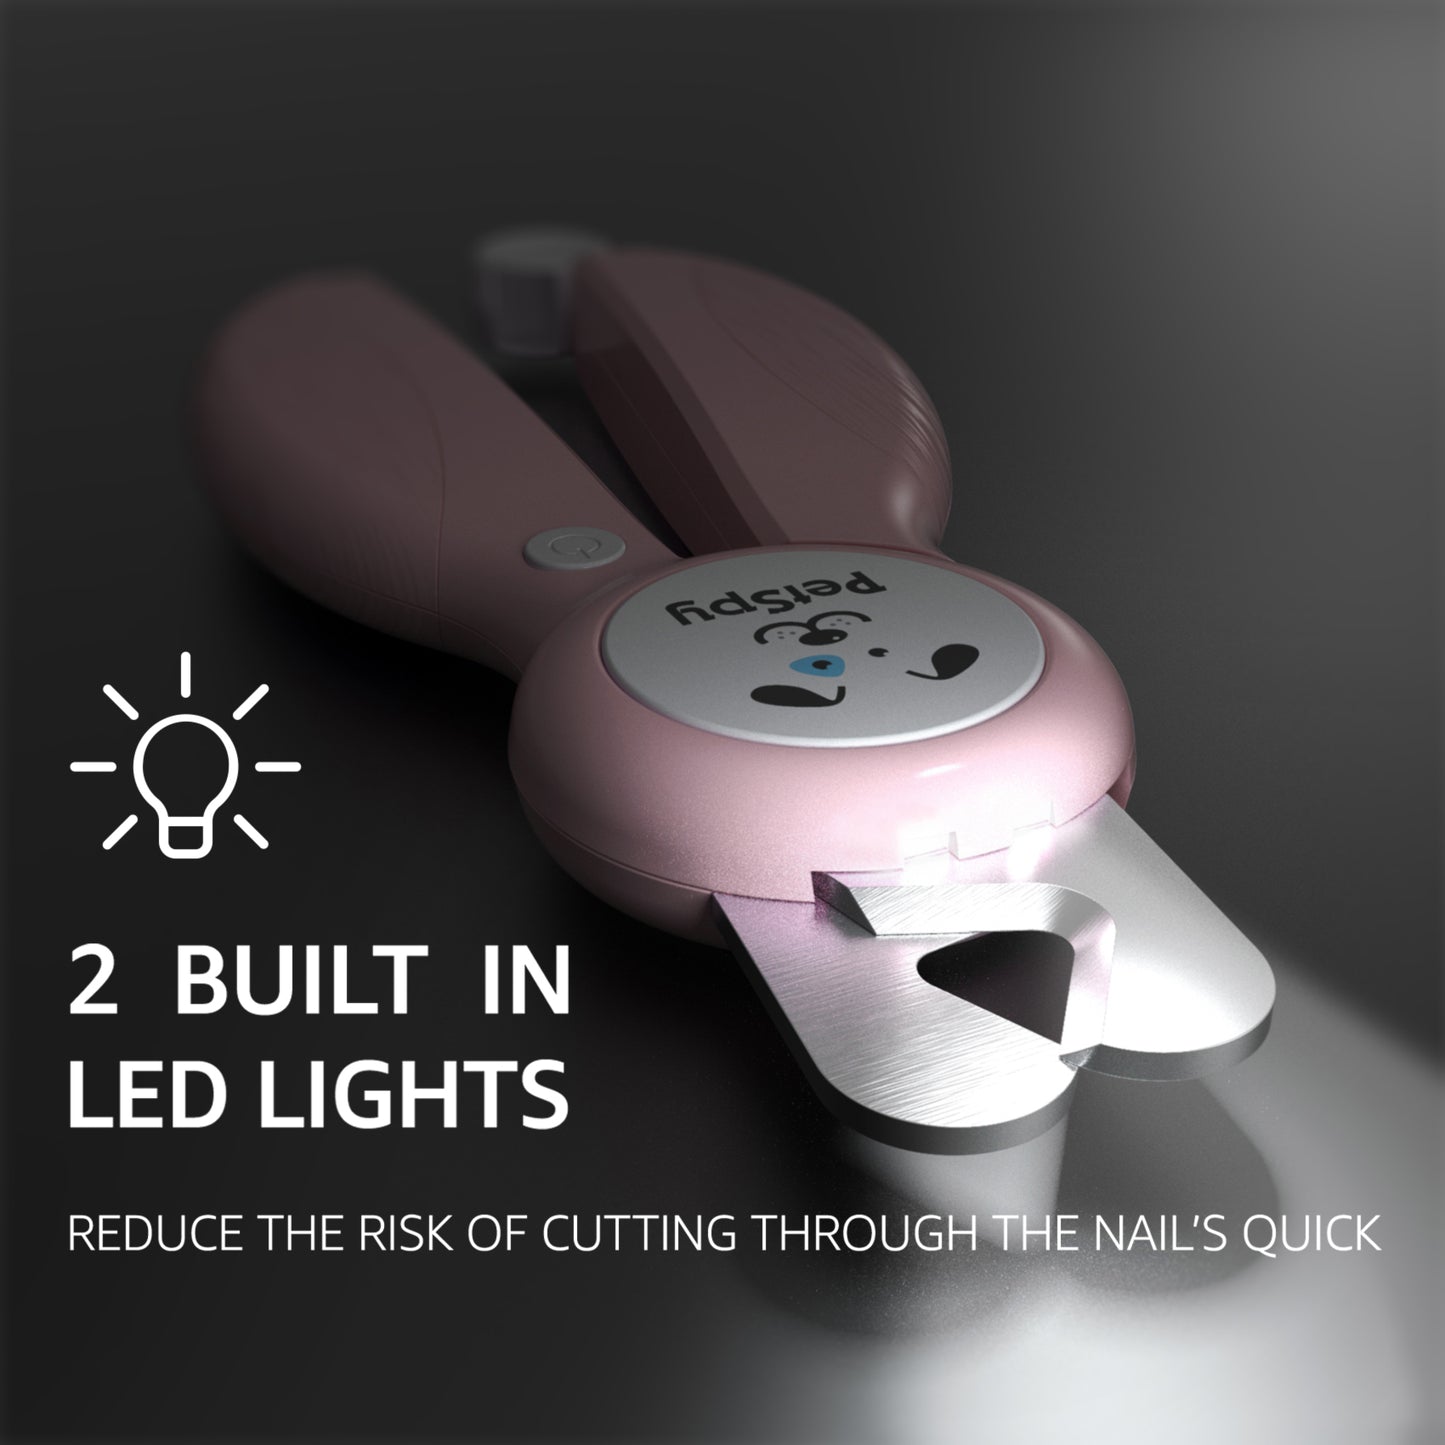 2 built in led lights_reduce the risk of cutting through the nail's quick